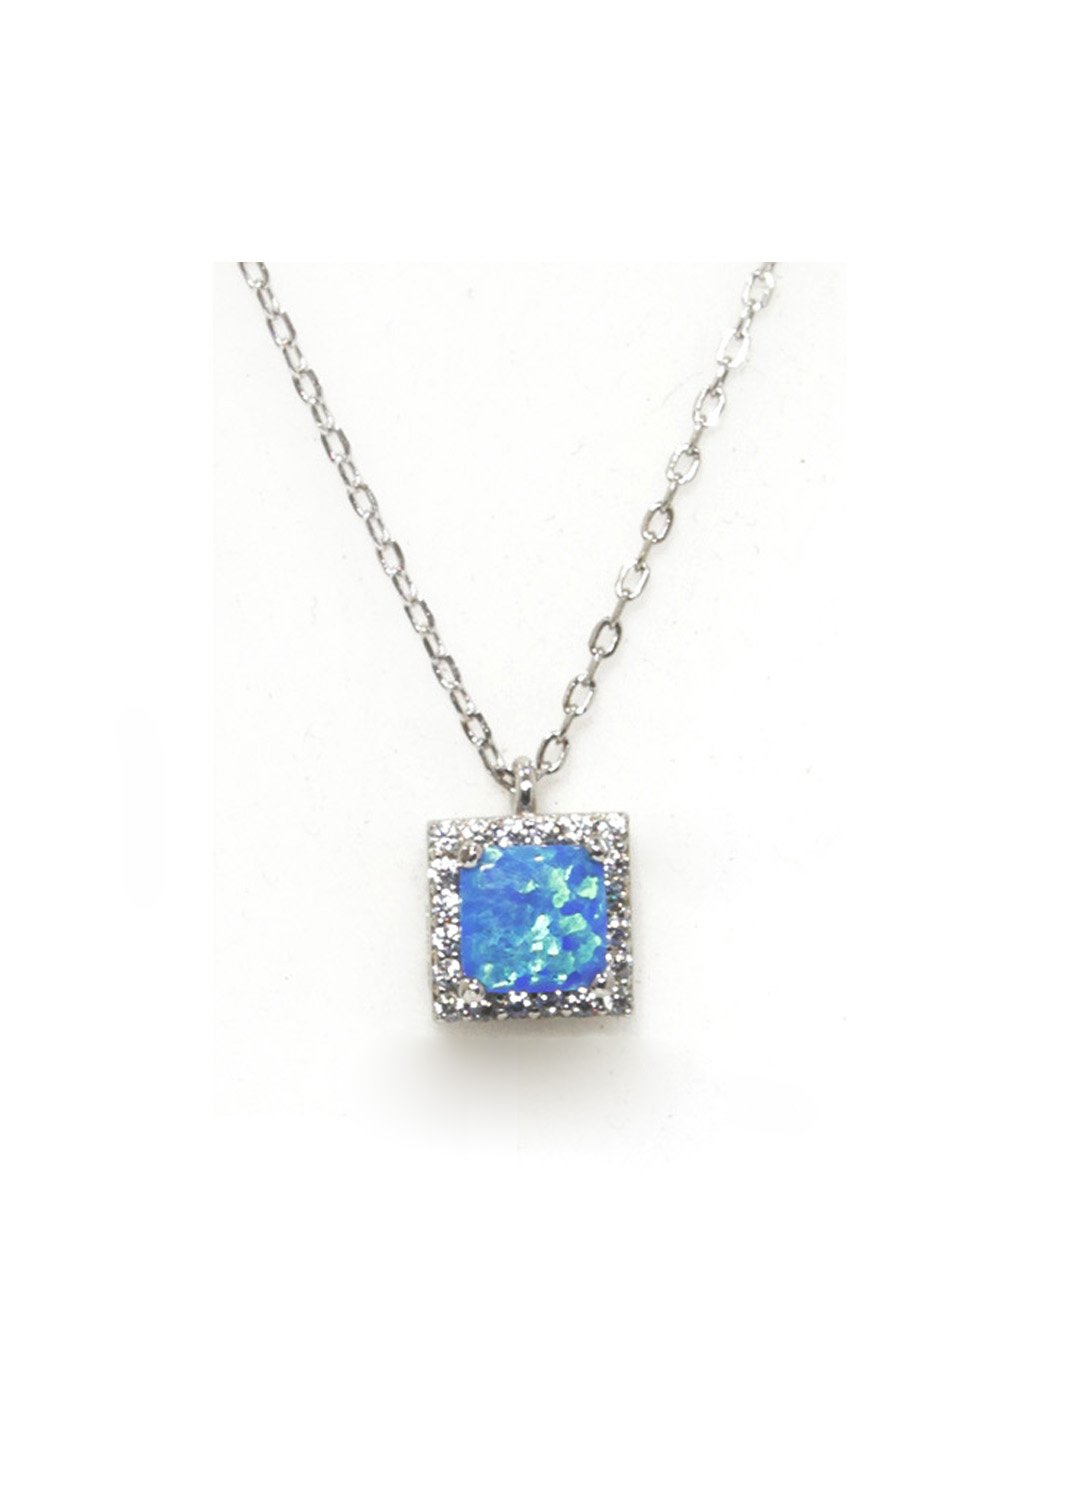 Pendant silver necklace with opal and zircon